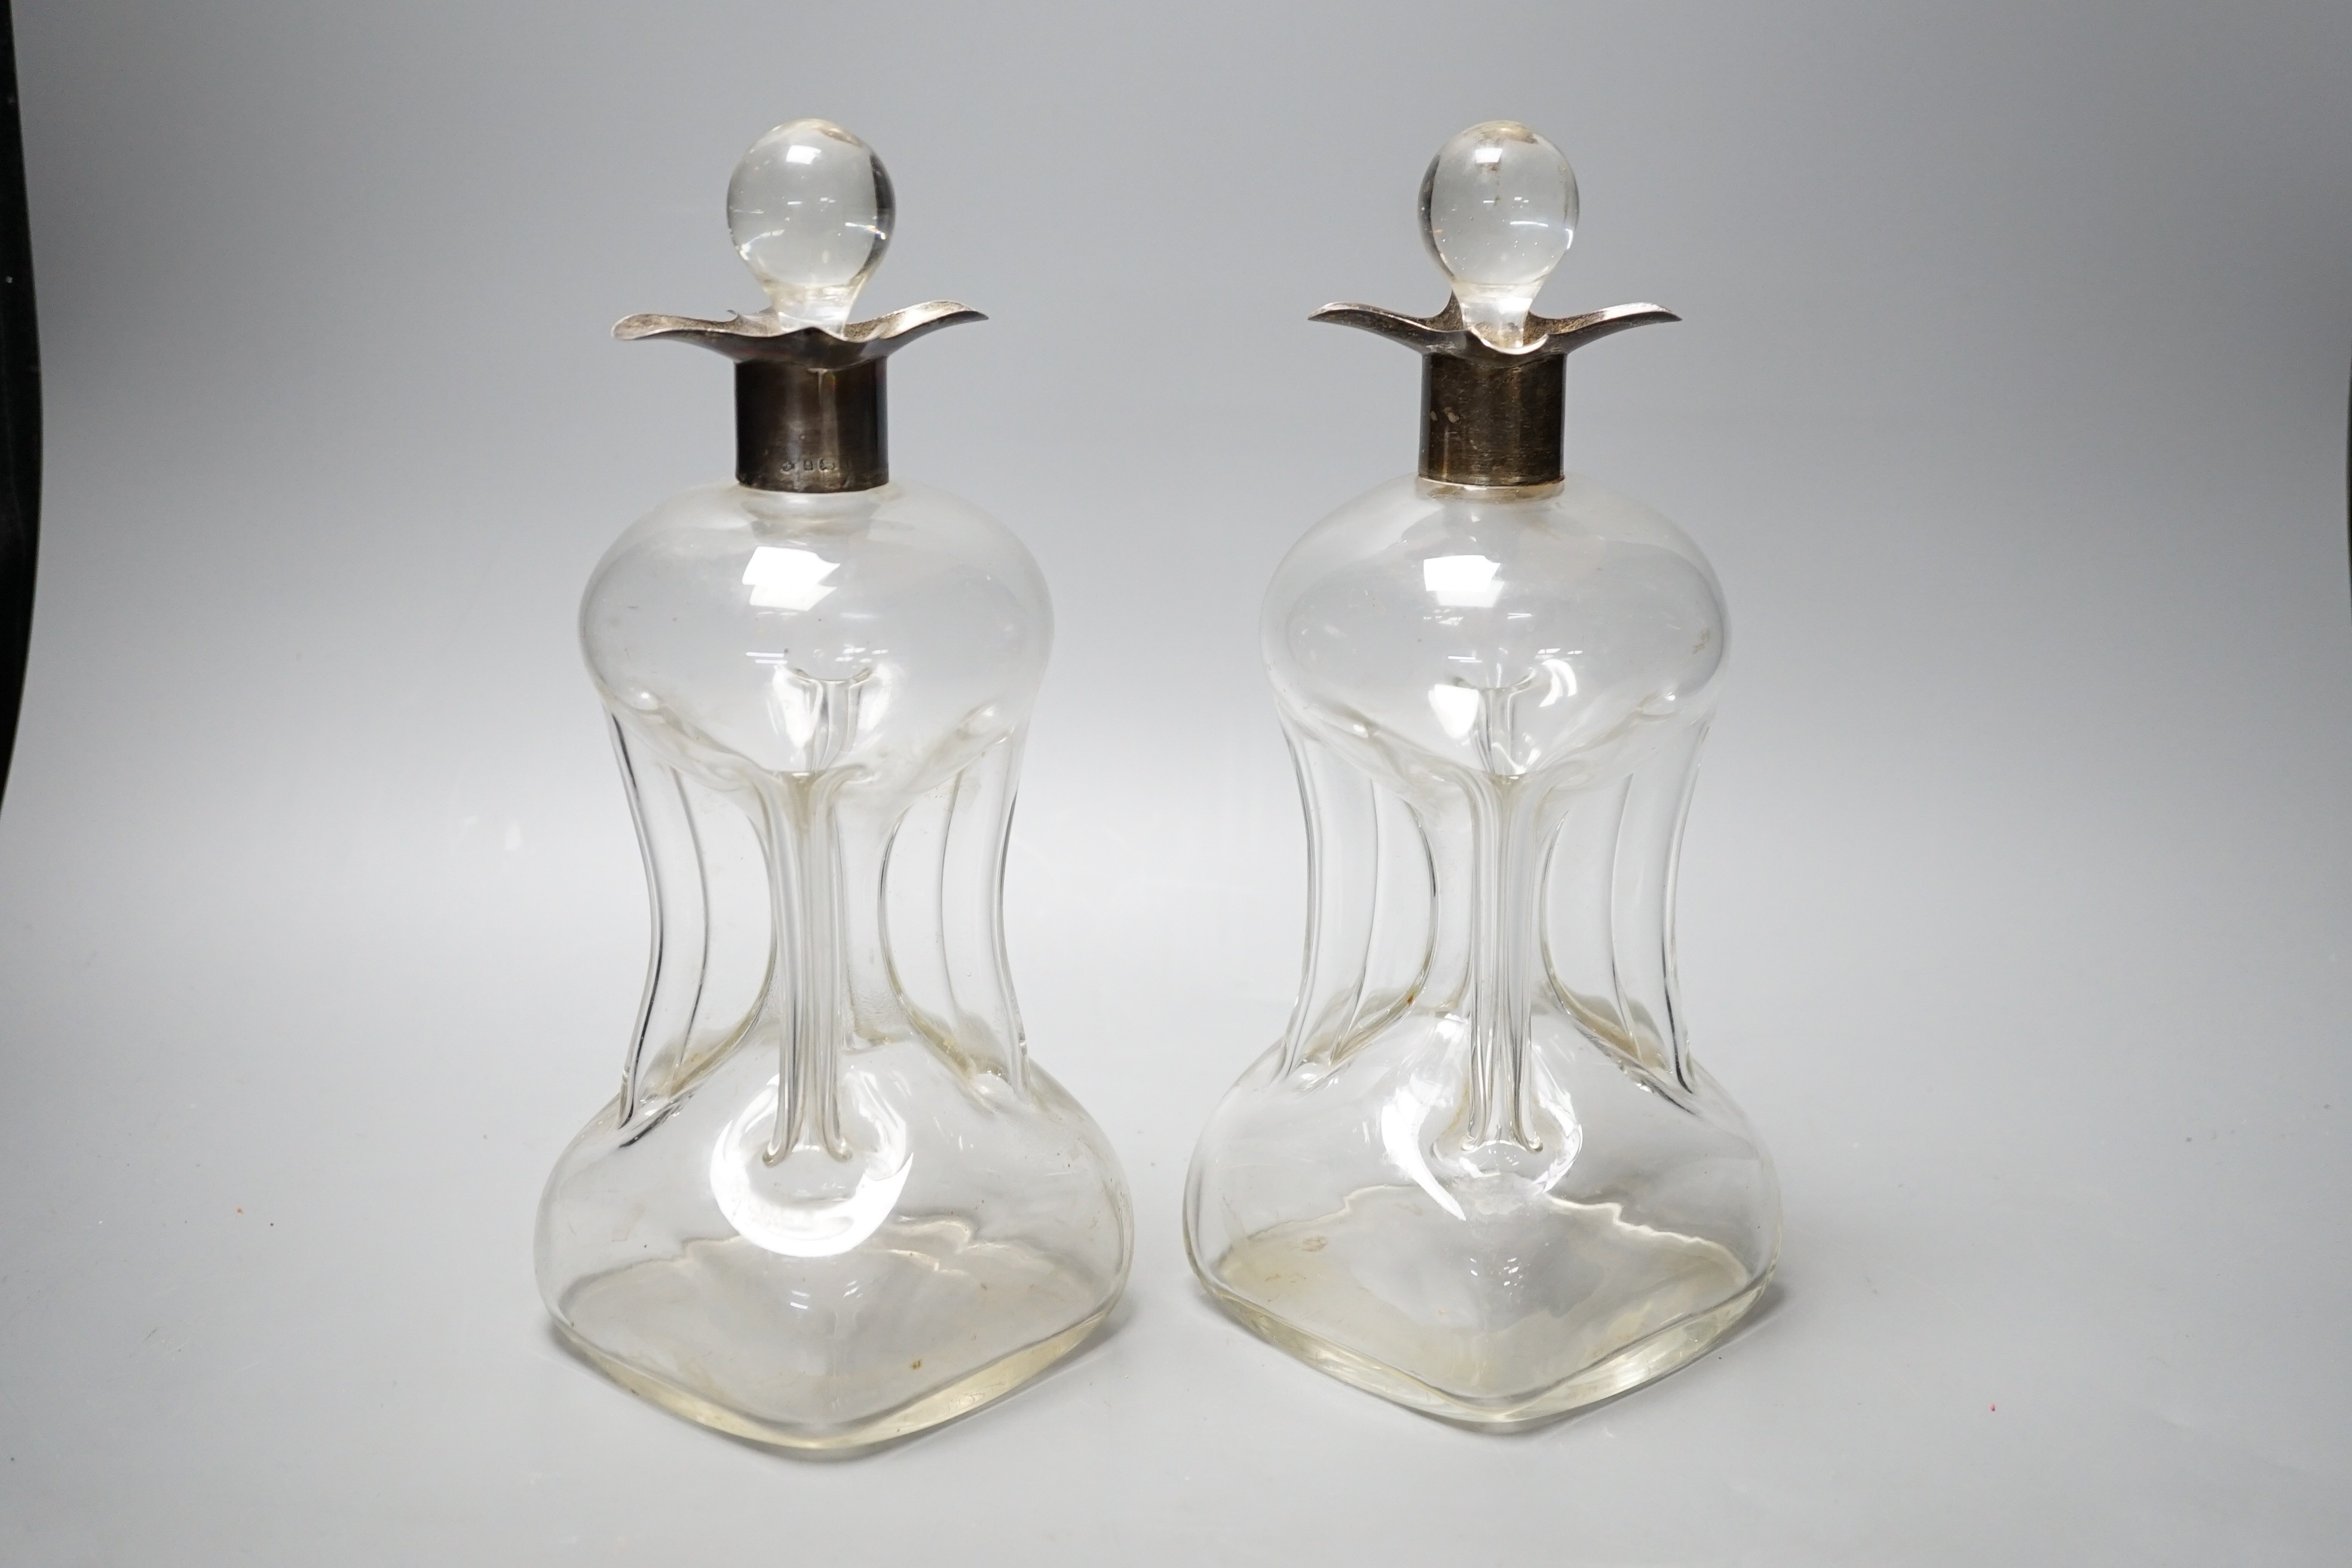 A pair of Edwardian silver mounted hourglass shaped glass decanters with stoppers, by William Hutton & Sons, Birmingham, 1903, overall height 27.5cm.